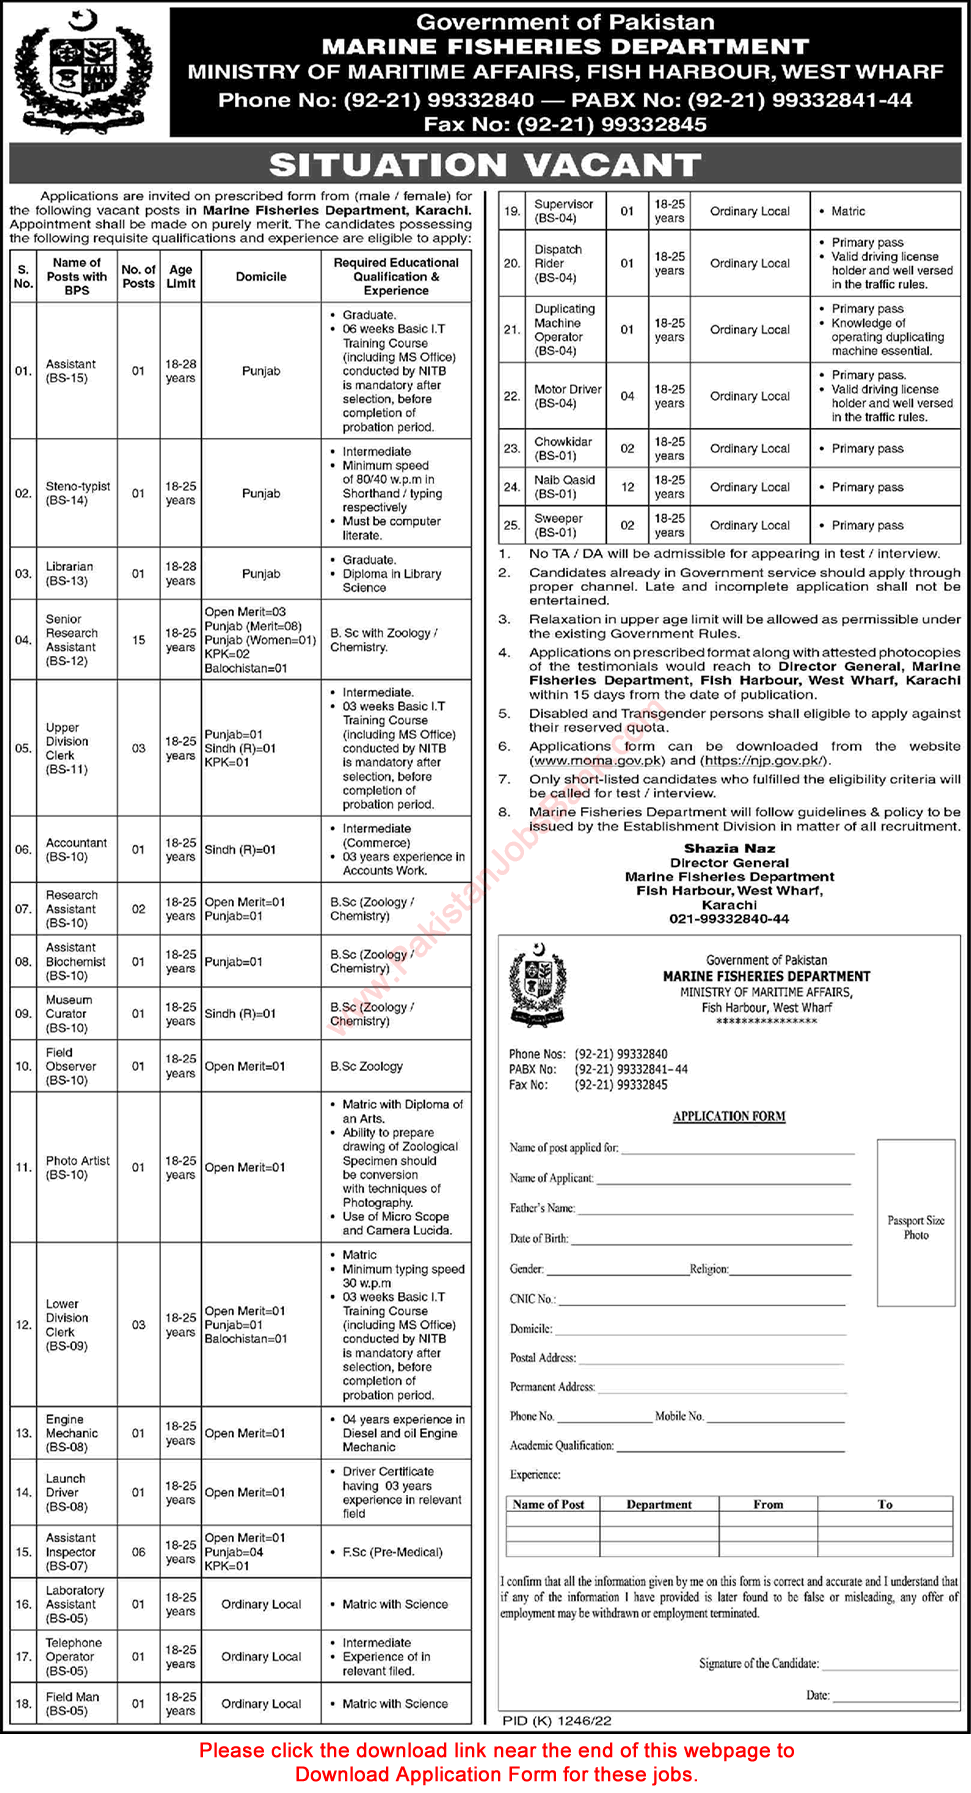 Marine Fisheries Department Karachi Jobs 2022 November Application Form Research Assistants & Others Latest